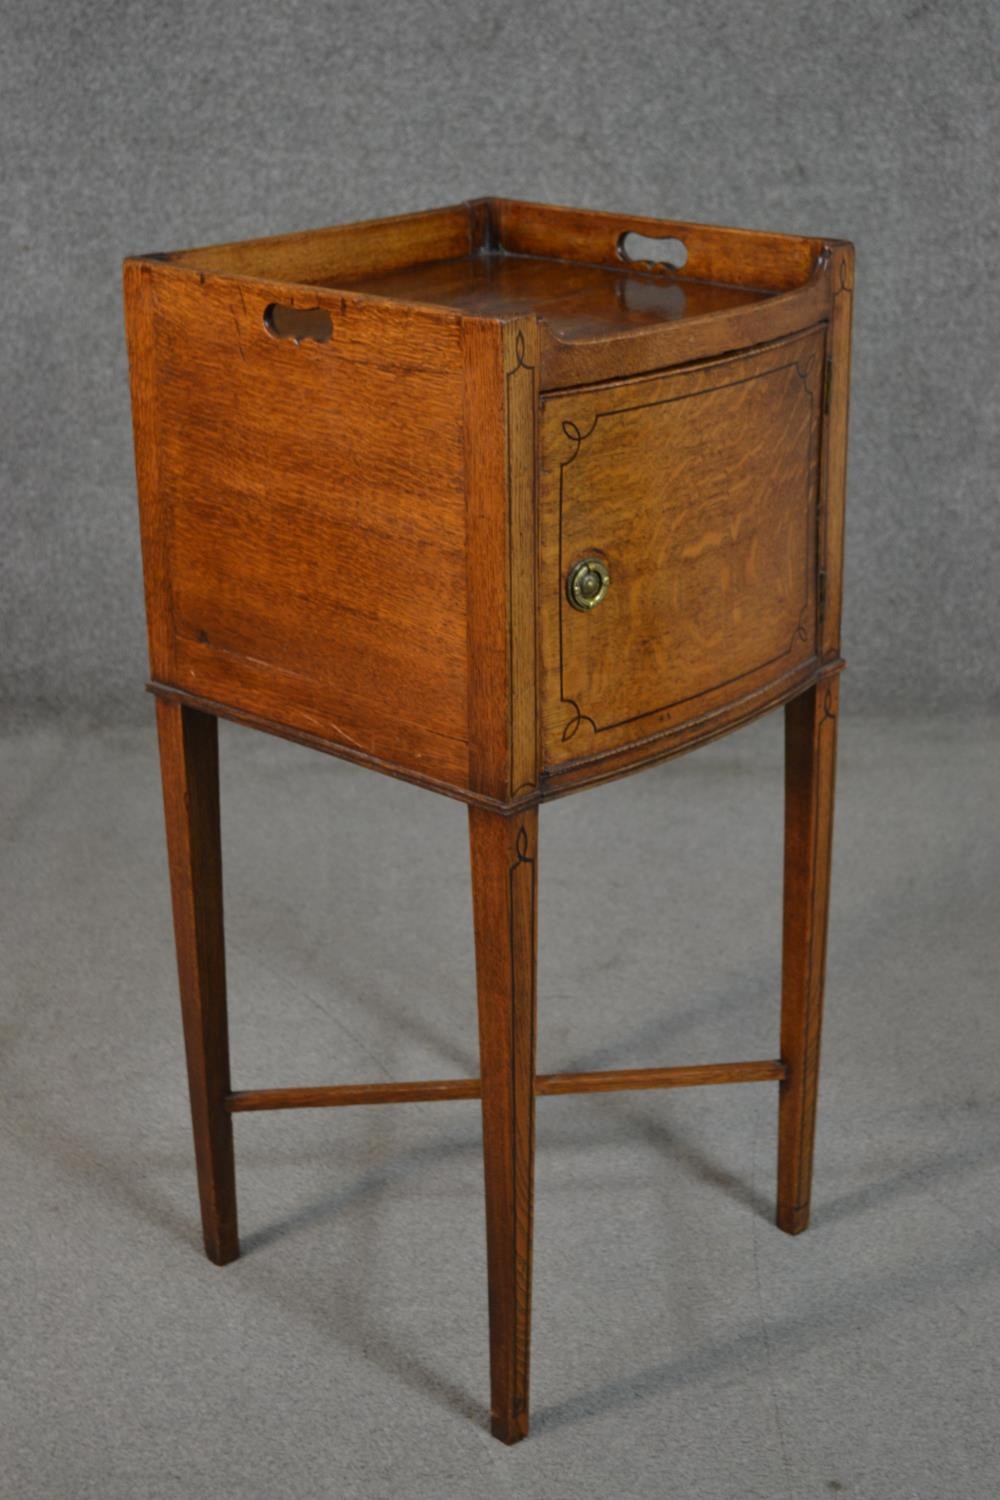 A George III style oak and inlaid bedside cabinet, the gallery top with handles, over a cupboard - Image 4 of 7